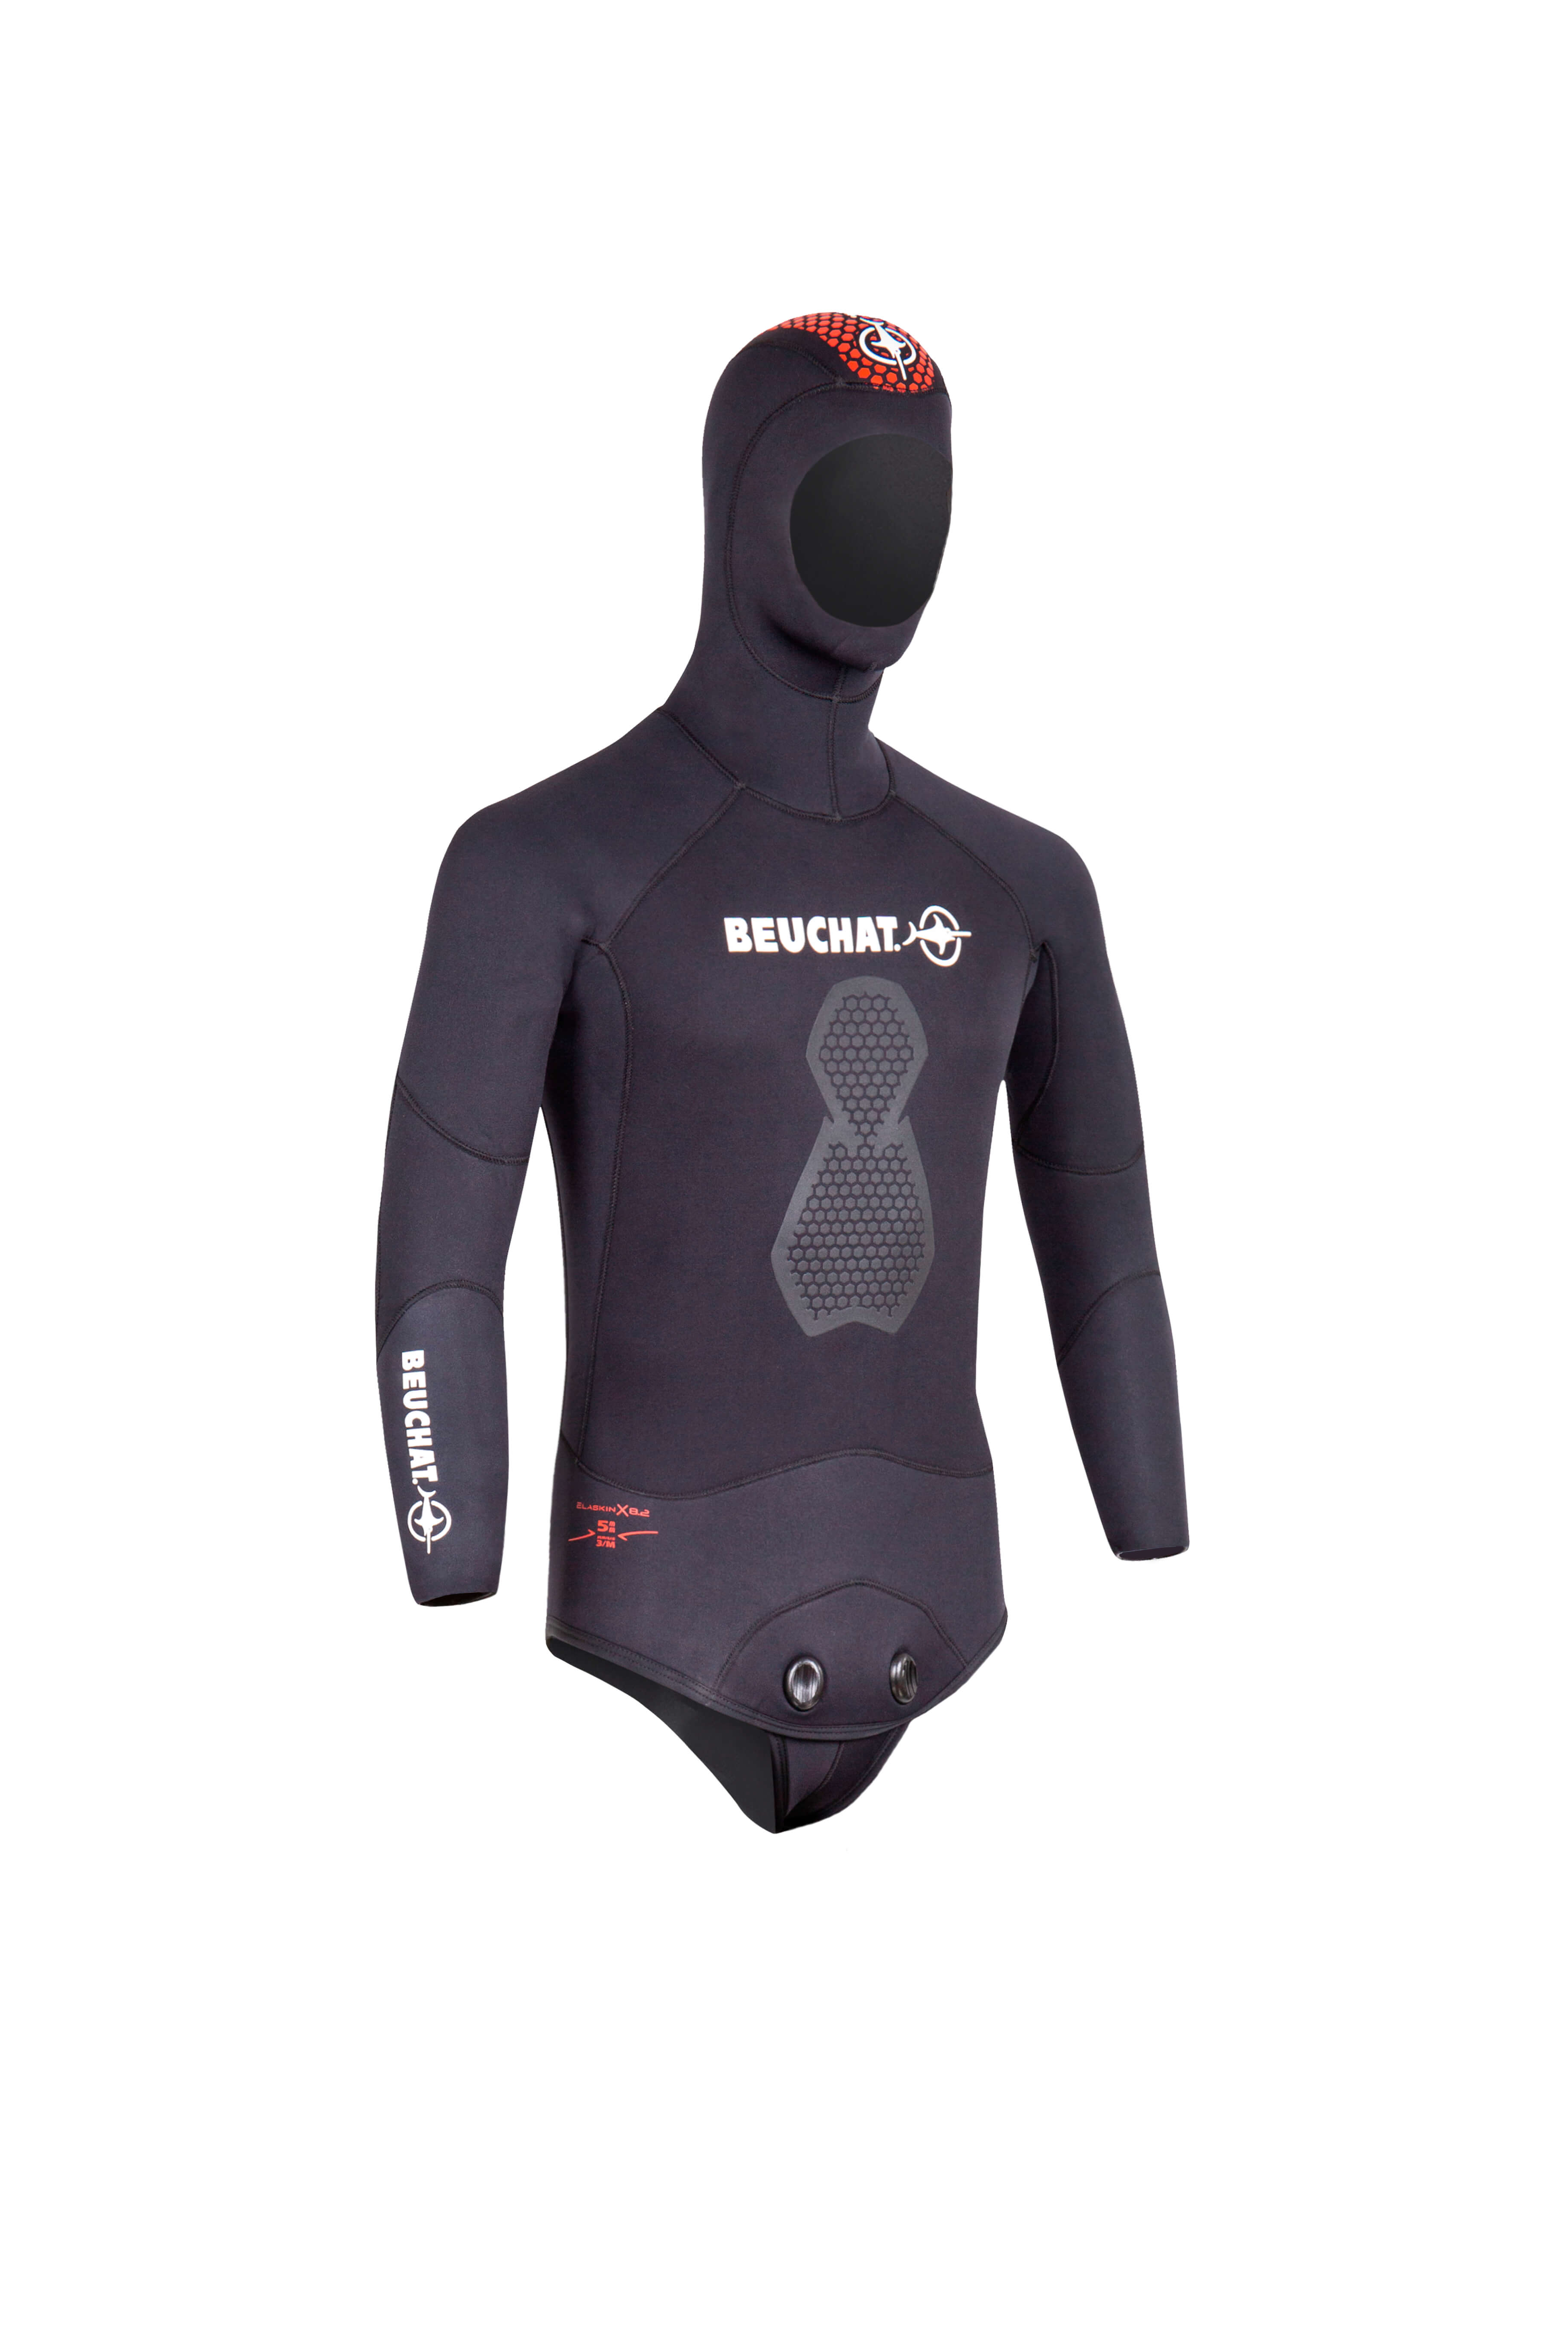 Spearfishing Wetsuit Beuchat Espadon - 7 mm - Nootica - Water addicts, like  you!